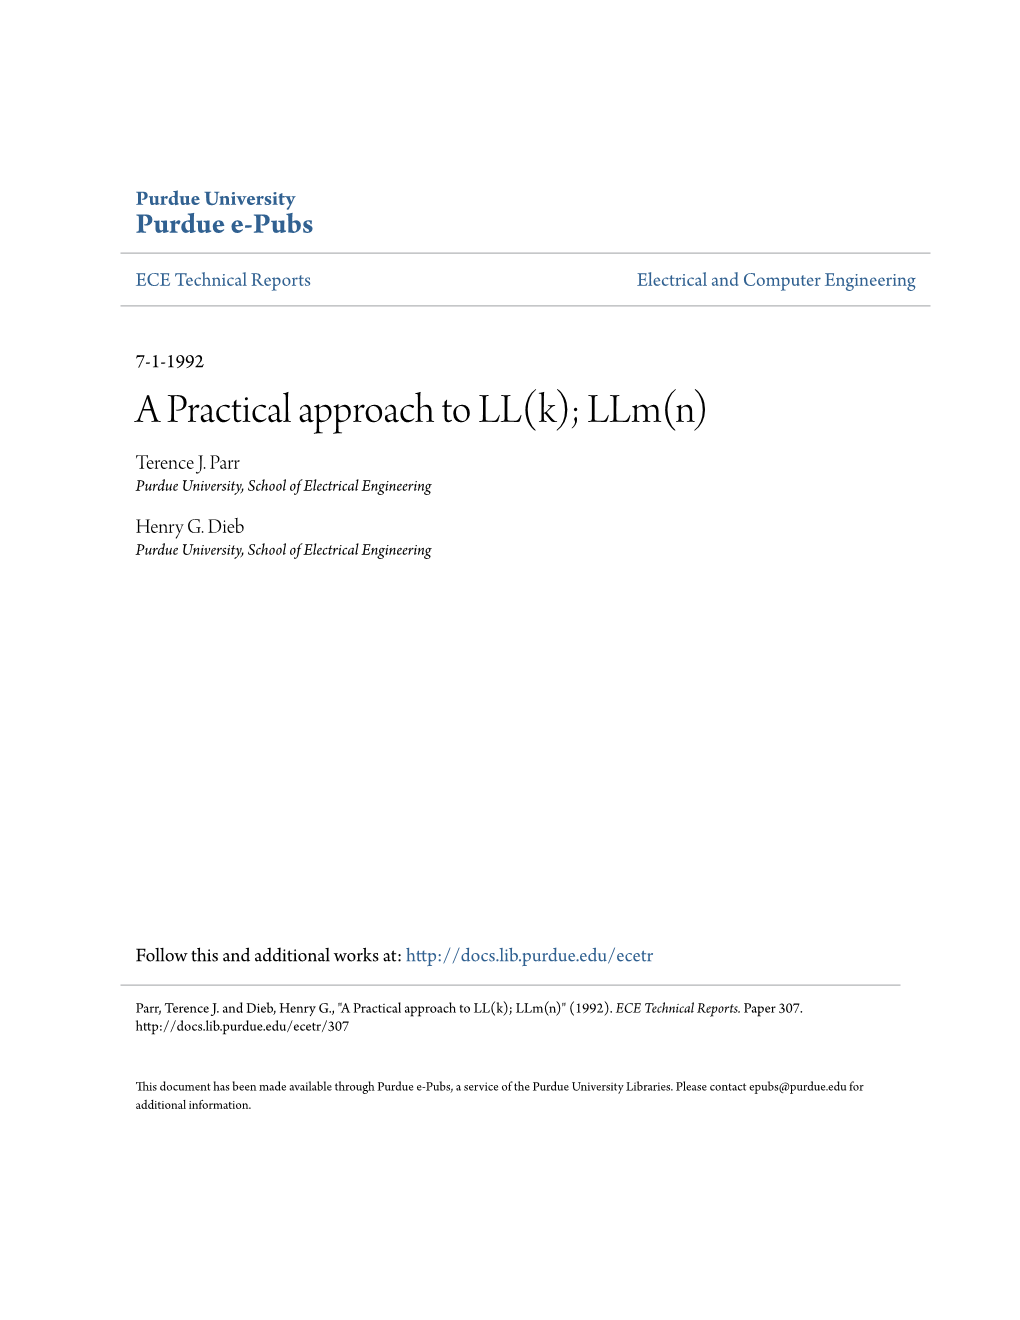 A Practical Approach to LL(K); Llm(N) Terence J